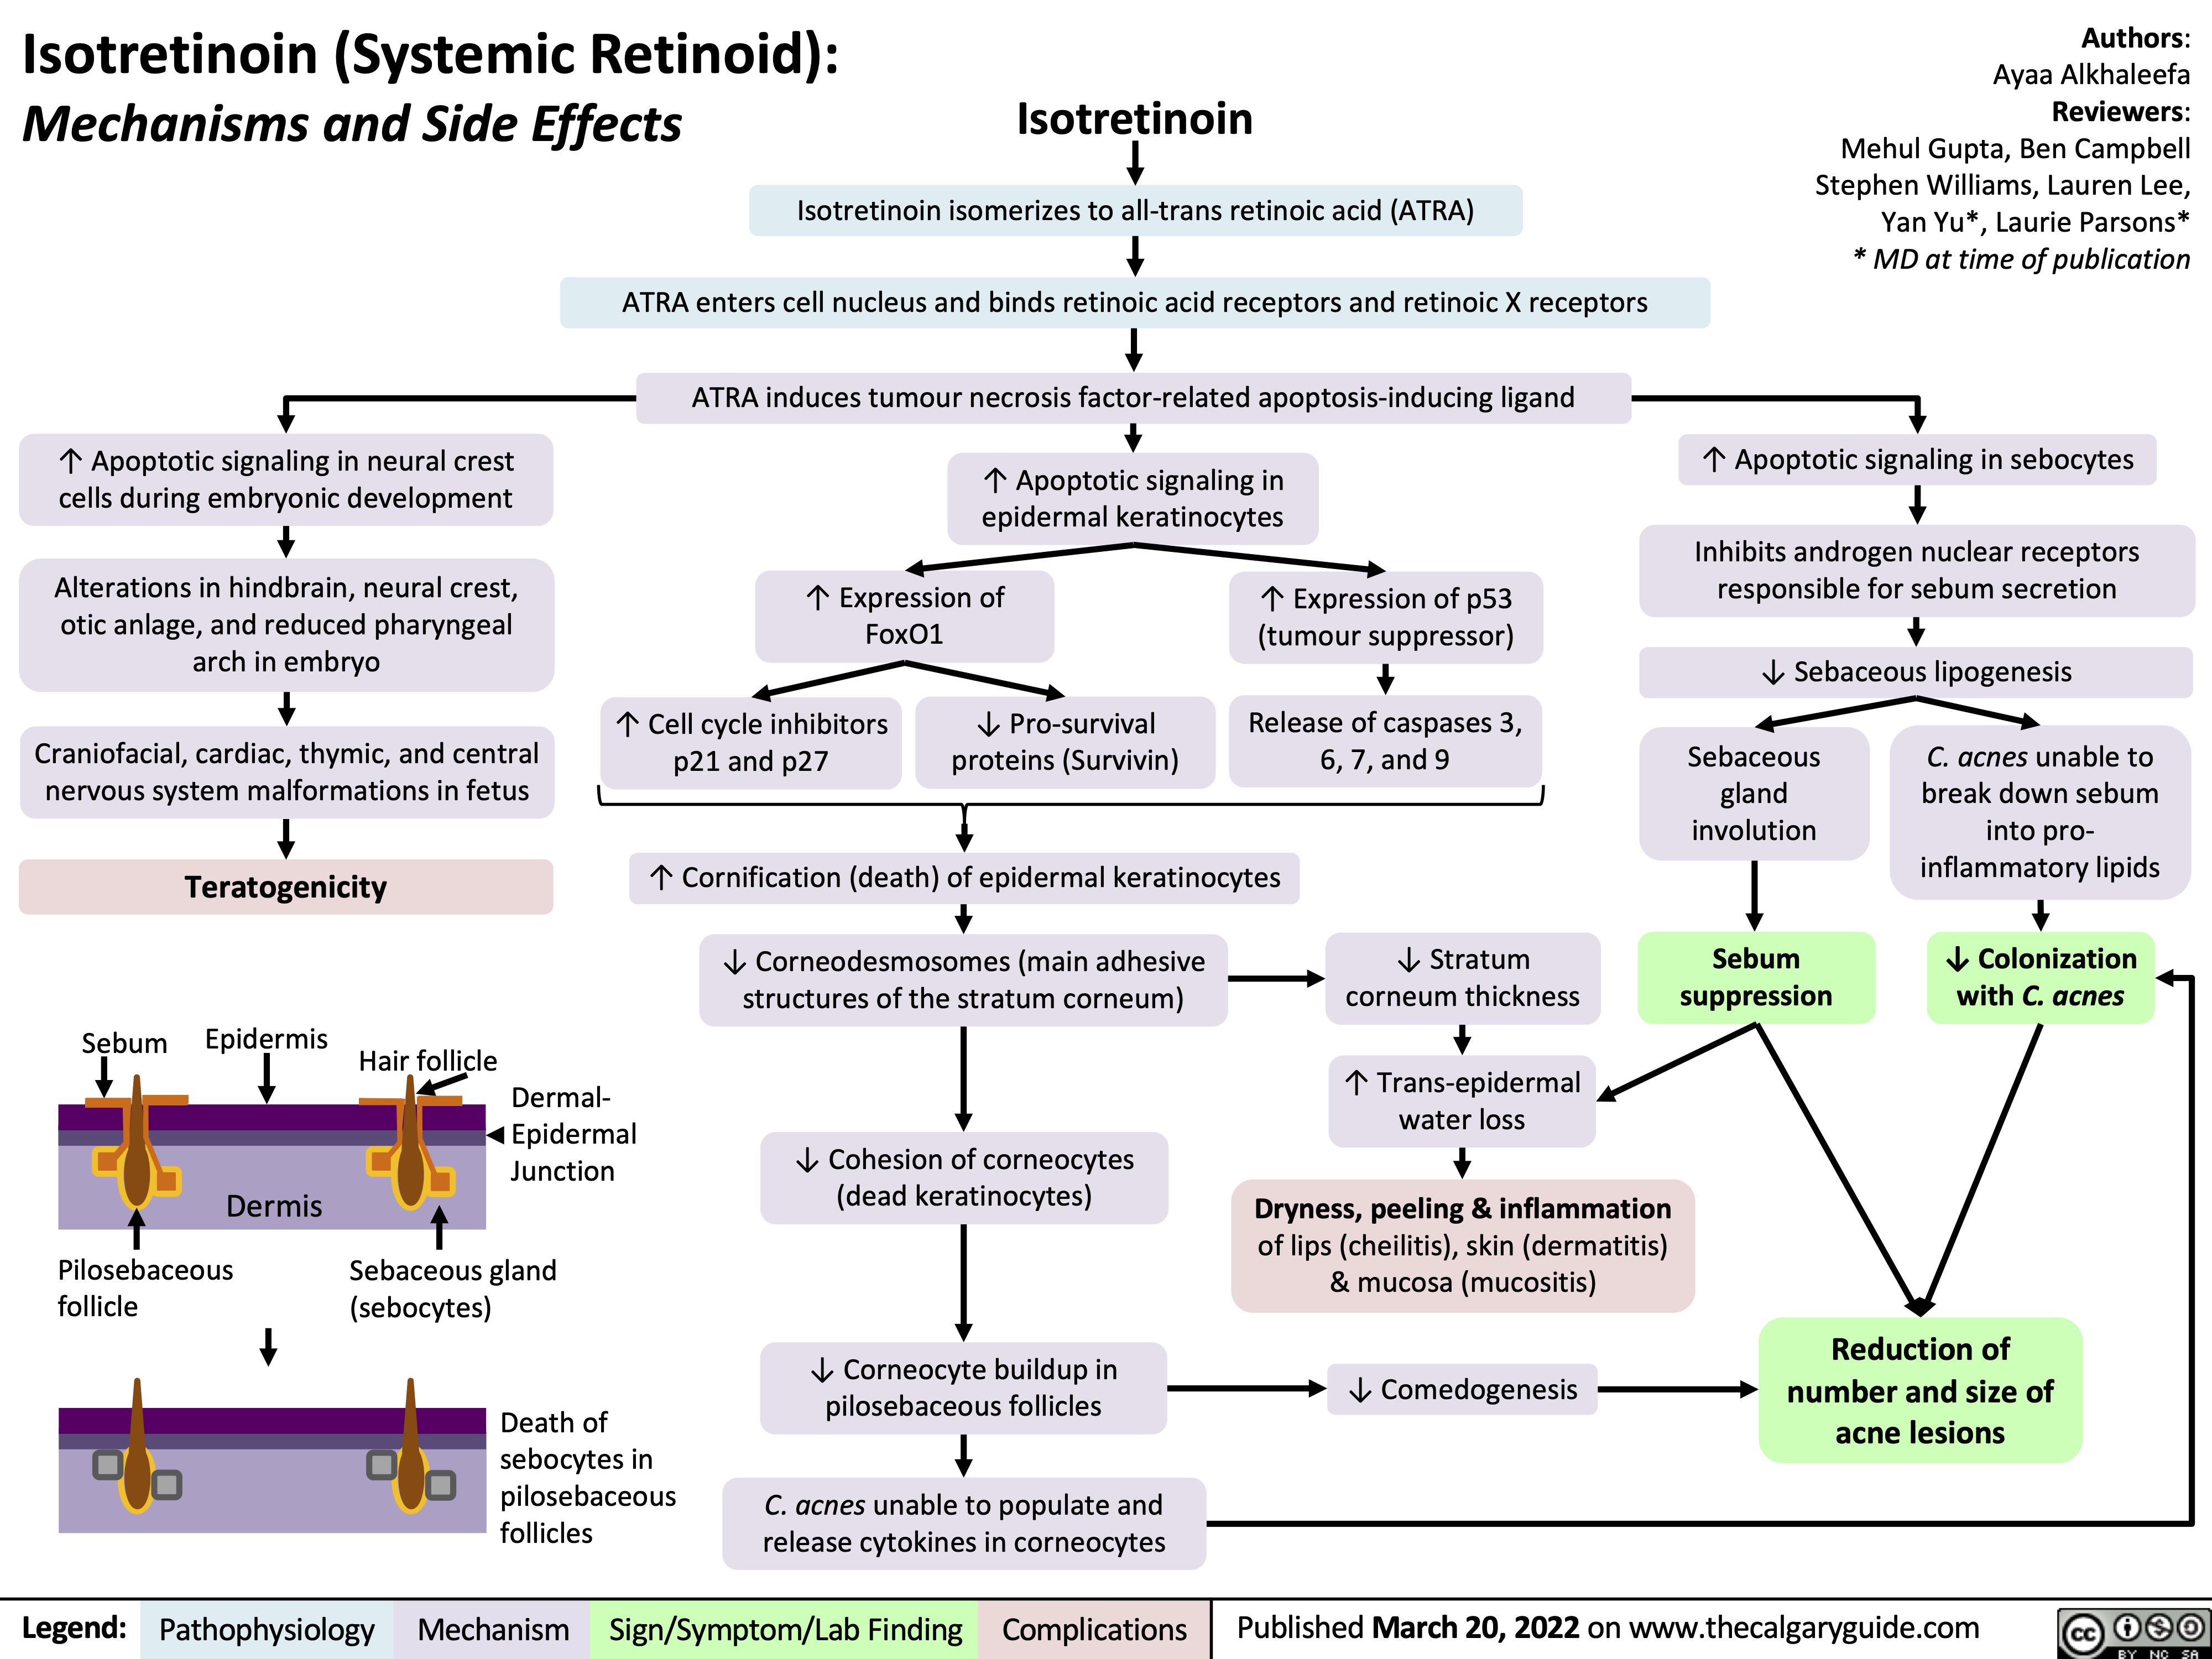 Isotretinoin (Systemic Retinoid):
Mechanisms and Side Effects
Isotretinoin
Authors: Ayaa Alkhaleefa Reviewers: Mehul Gupta, Ben Campbell Stephen Williams, Lauren Lee, Yan Yu*, Laurie Parsons* * MD at time of publication
↑ Apoptotic signaling in sebocytes
Inhibits androgen nuclear receptors responsible for sebum secretion
↓ Sebaceous lipogenesis
       ↑ Apoptotic signaling in neural crest cells during embryonic development
Alterations in hindbrain, neural crest, otic anlage, and reduced pharyngeal arch in embryo
Craniofacial, cardiac, thymic, and central nervous system malformations in fetus
Isotretinoin isomerizes to all-trans retinoic acid (ATRA)
ATRA enters cell nucleus and binds retinoic acid receptors and retinoic X receptors
ATRA induces tumour necrosis factor-related apoptosis-inducing ligand
↑ Apoptotic signaling in epidermal keratinocytes
      ↑ Expression of FoxO1
↑ Expression of p53 (tumour suppressor)
Release of caspases 3, 6, 7, and 9
        ↑ Cell cycle inhibitors p21 and p27
↓ Pro-survival proteins (Survivin)
Sebaceous gland involution
Sebum suppression
C. acnes unable to break down sebum into pro- inflammatory lipids
↓ Colonization with C. acnes
      Teratogenicity
↑ Cornification (death) of epidermal keratinocytes
↓ Corneodesmosomes (main adhesive structures of the stratum corneum)
↓ Cohesion of corneocytes (dead keratinocytes)
↓ Corneocyte buildup in pilosebaceous follicles
C. acnes unable to populate and release cytokines in corneocytes
     Epidermis
Dermis
Pilosebaceous follicle
↓ Stratum corneum thickness
↑ Trans-epidermal water loss
Dryness, peeling & inflammation
of lips (cheilitis), skin (dermatitis) & mucosa (mucositis)
↓ Comedogenesis
  Sebum
Hair follicle Dermal-
Epidermal Junction
Sebaceous gland (sebocytes)
Death of sebocytes in pilosebaceous follicles
        Reduction of number and size of acne lesions
        Legend:
 Pathophysiology
Mechanism
Sign/Symptom/Lab Finding
 Complications
Published March 20, 2022 on www.thecalgaryguide.com
    